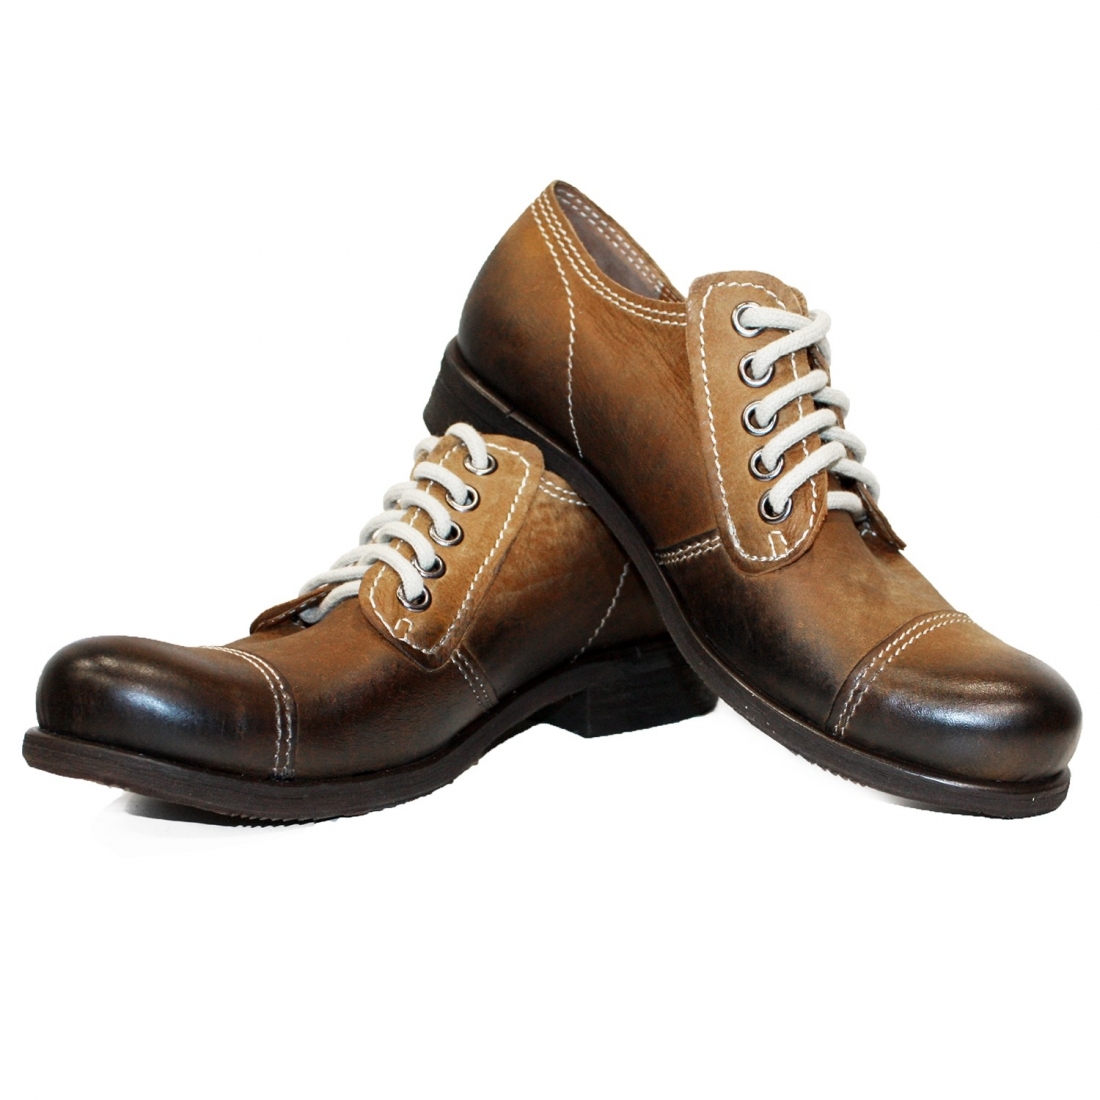 Modello Jetrello - Other Boots - Handmade Colorful Italian Leather Shoes